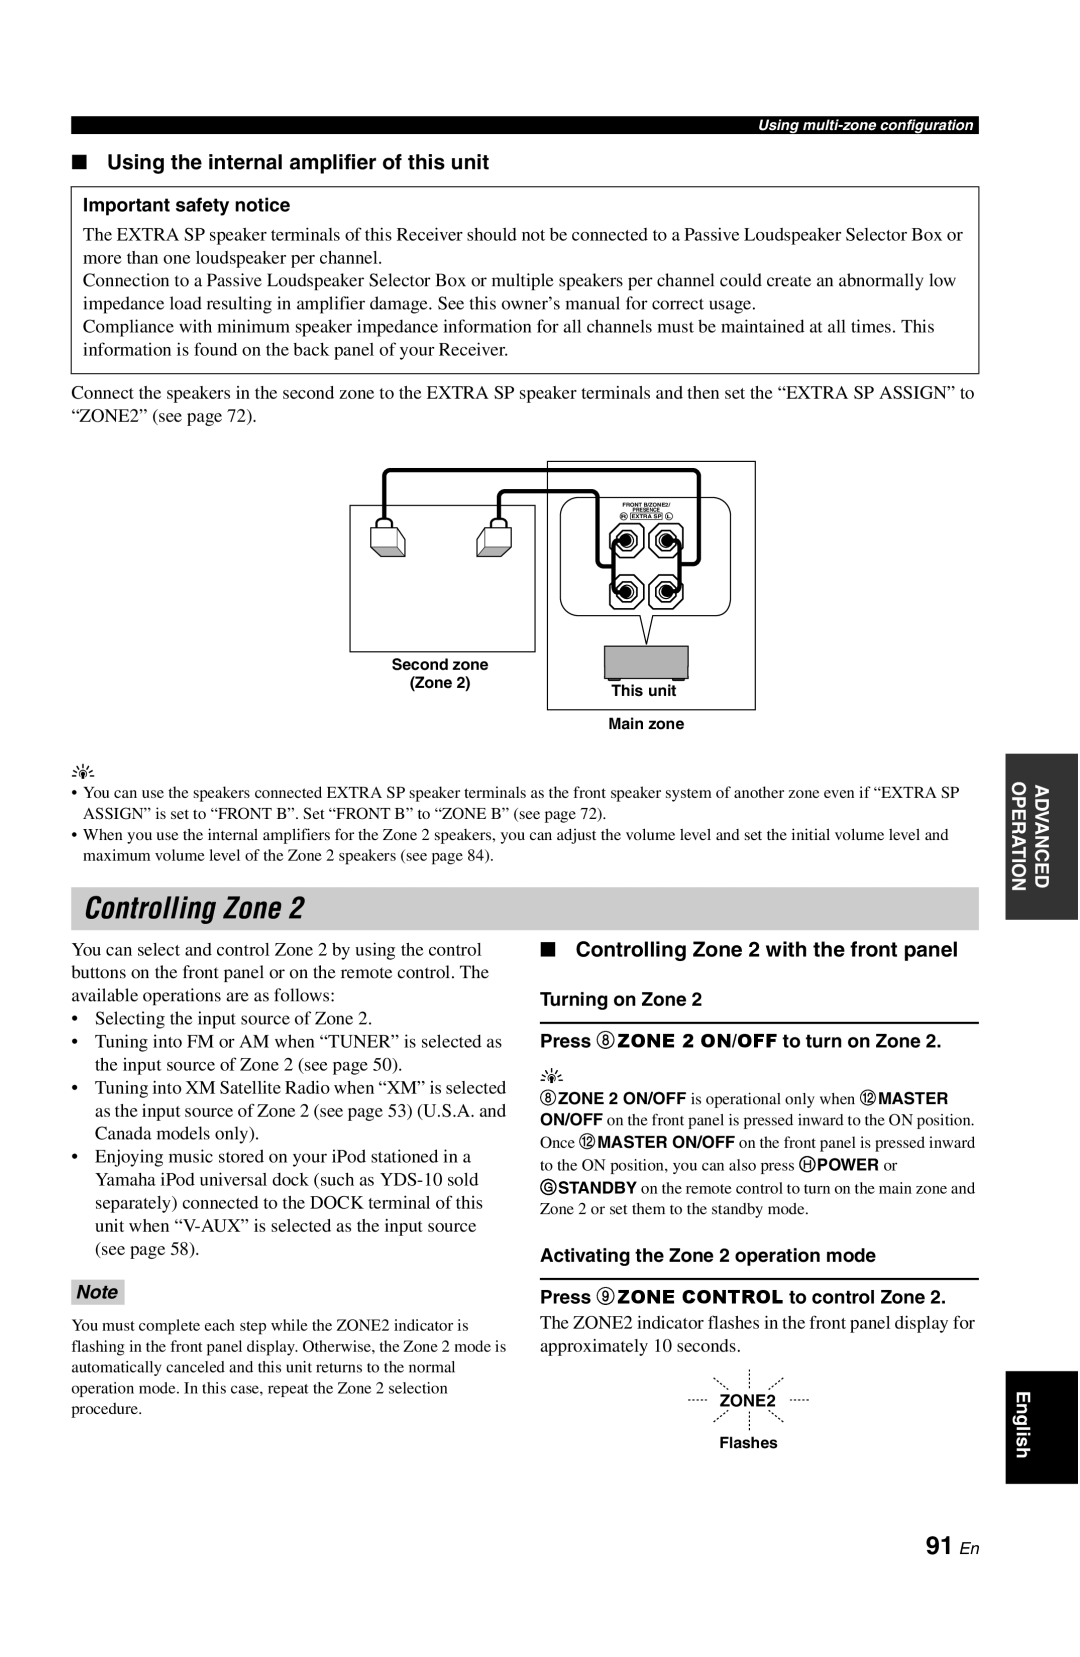 Yamaha RX-V861 owner manual 91 En, Using the internal amplifier of this unit, Controlling Zone 2 with the front panel 